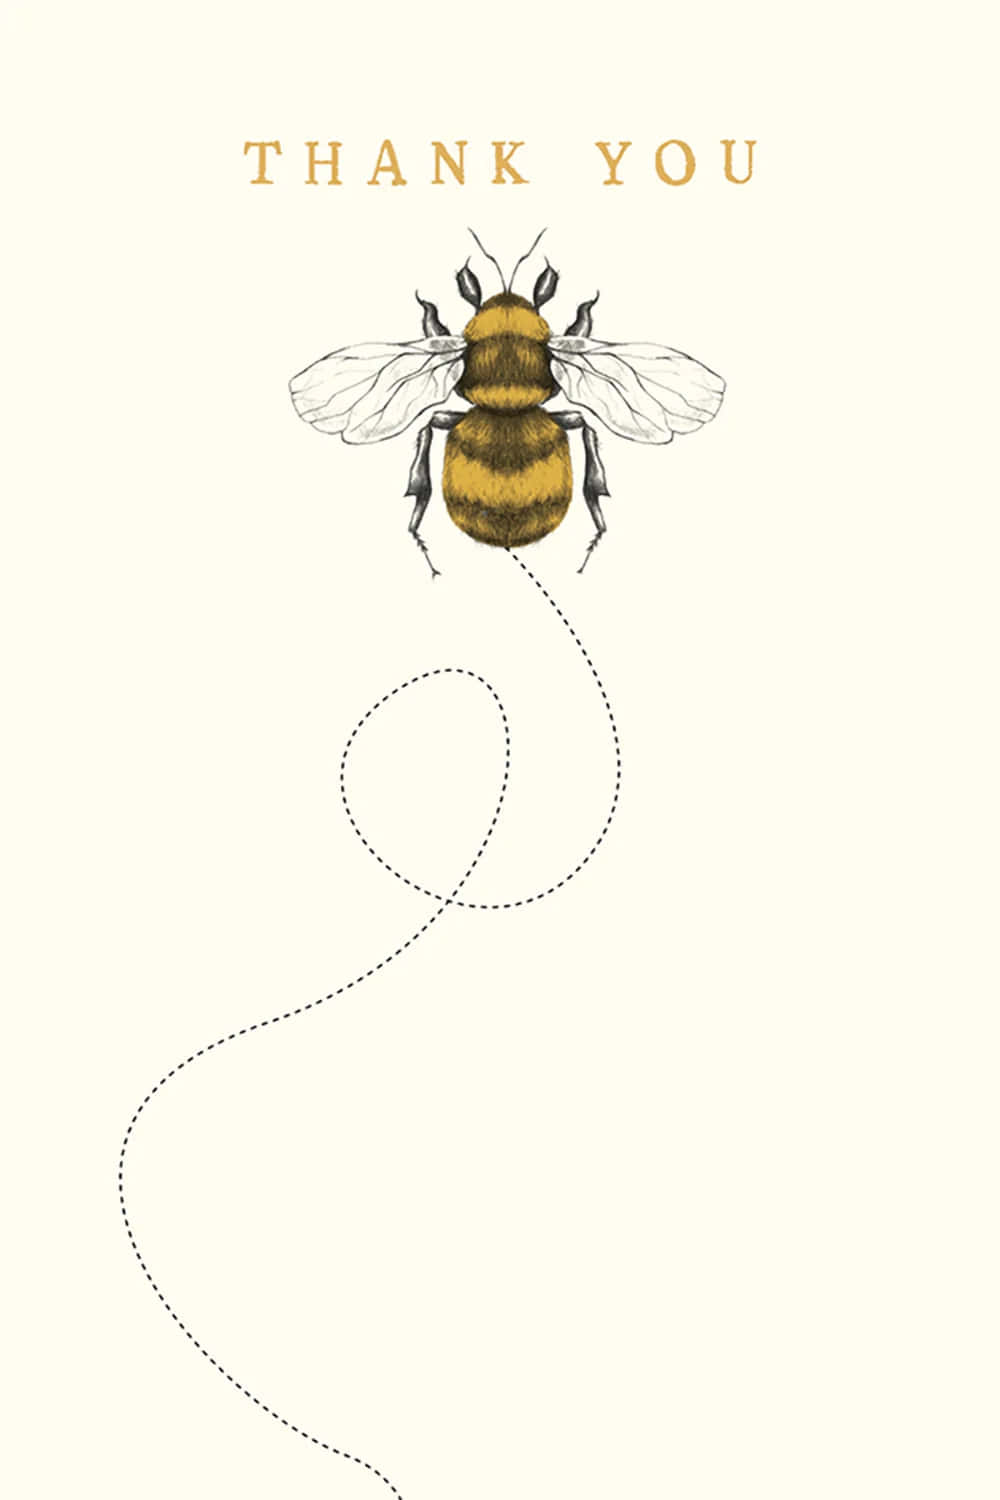 Vintage Bee Thank You Card Wallpaper